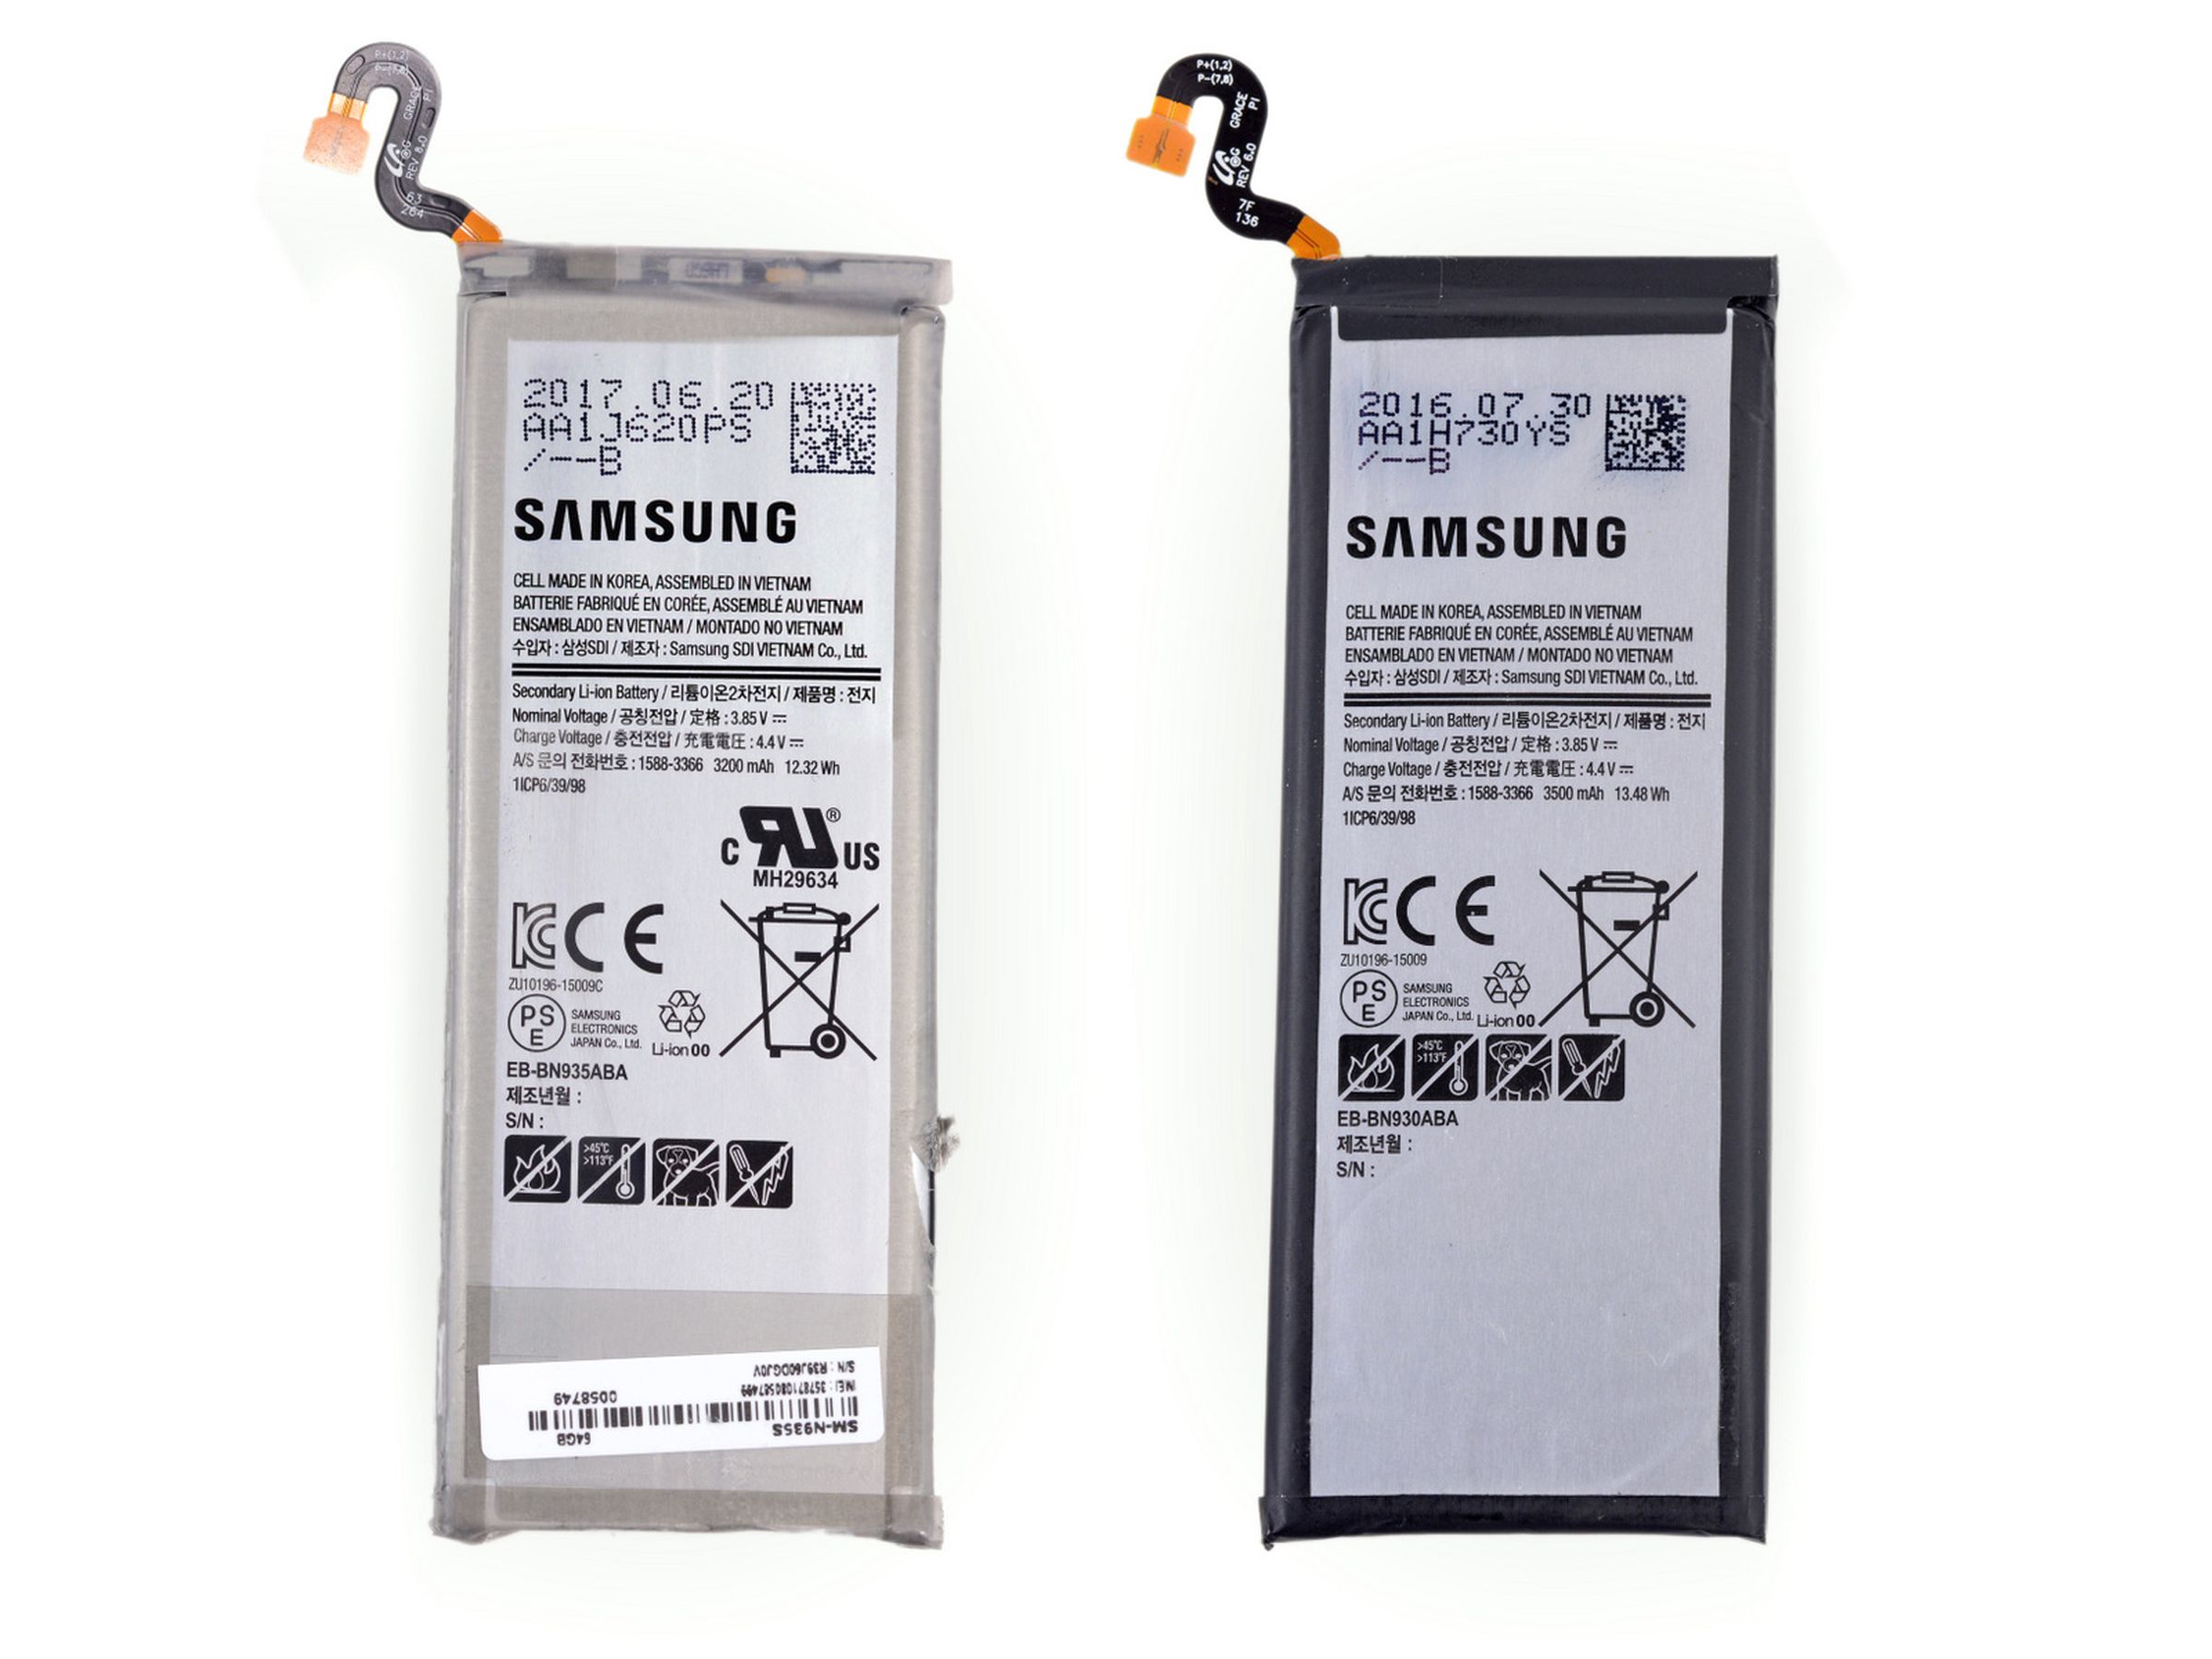 Left, the Note 7 Fan Edition battery. Right, the original Note 7 battery.